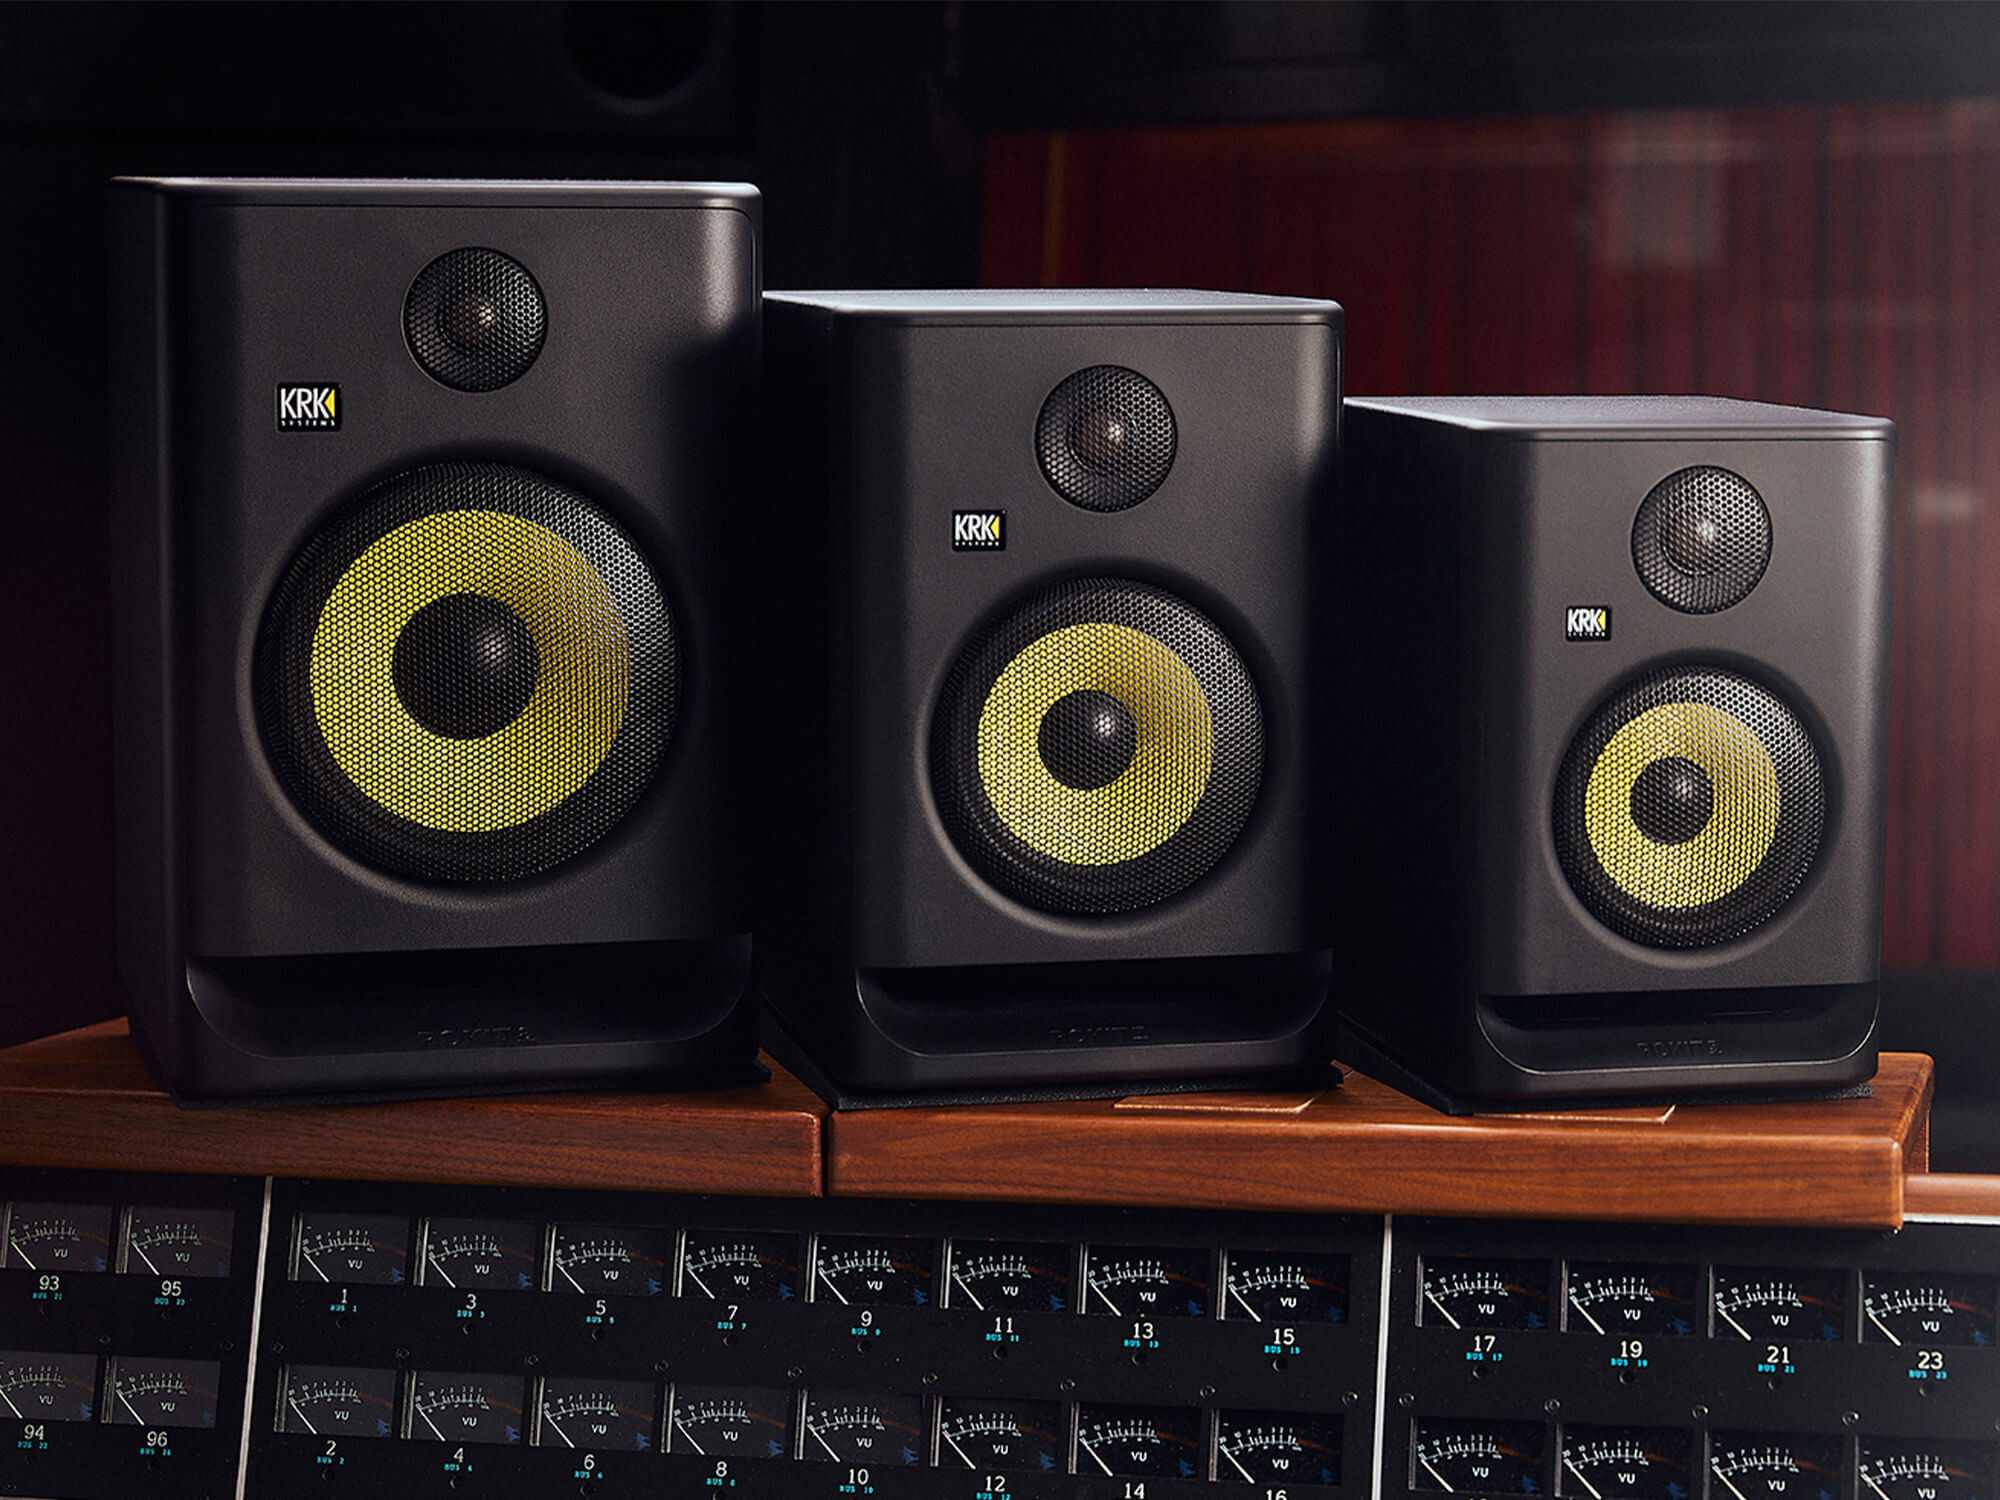 The KRK Rockit Gen 5 speakers. They are lined up in size order, and are black with yellow coloured speakers.